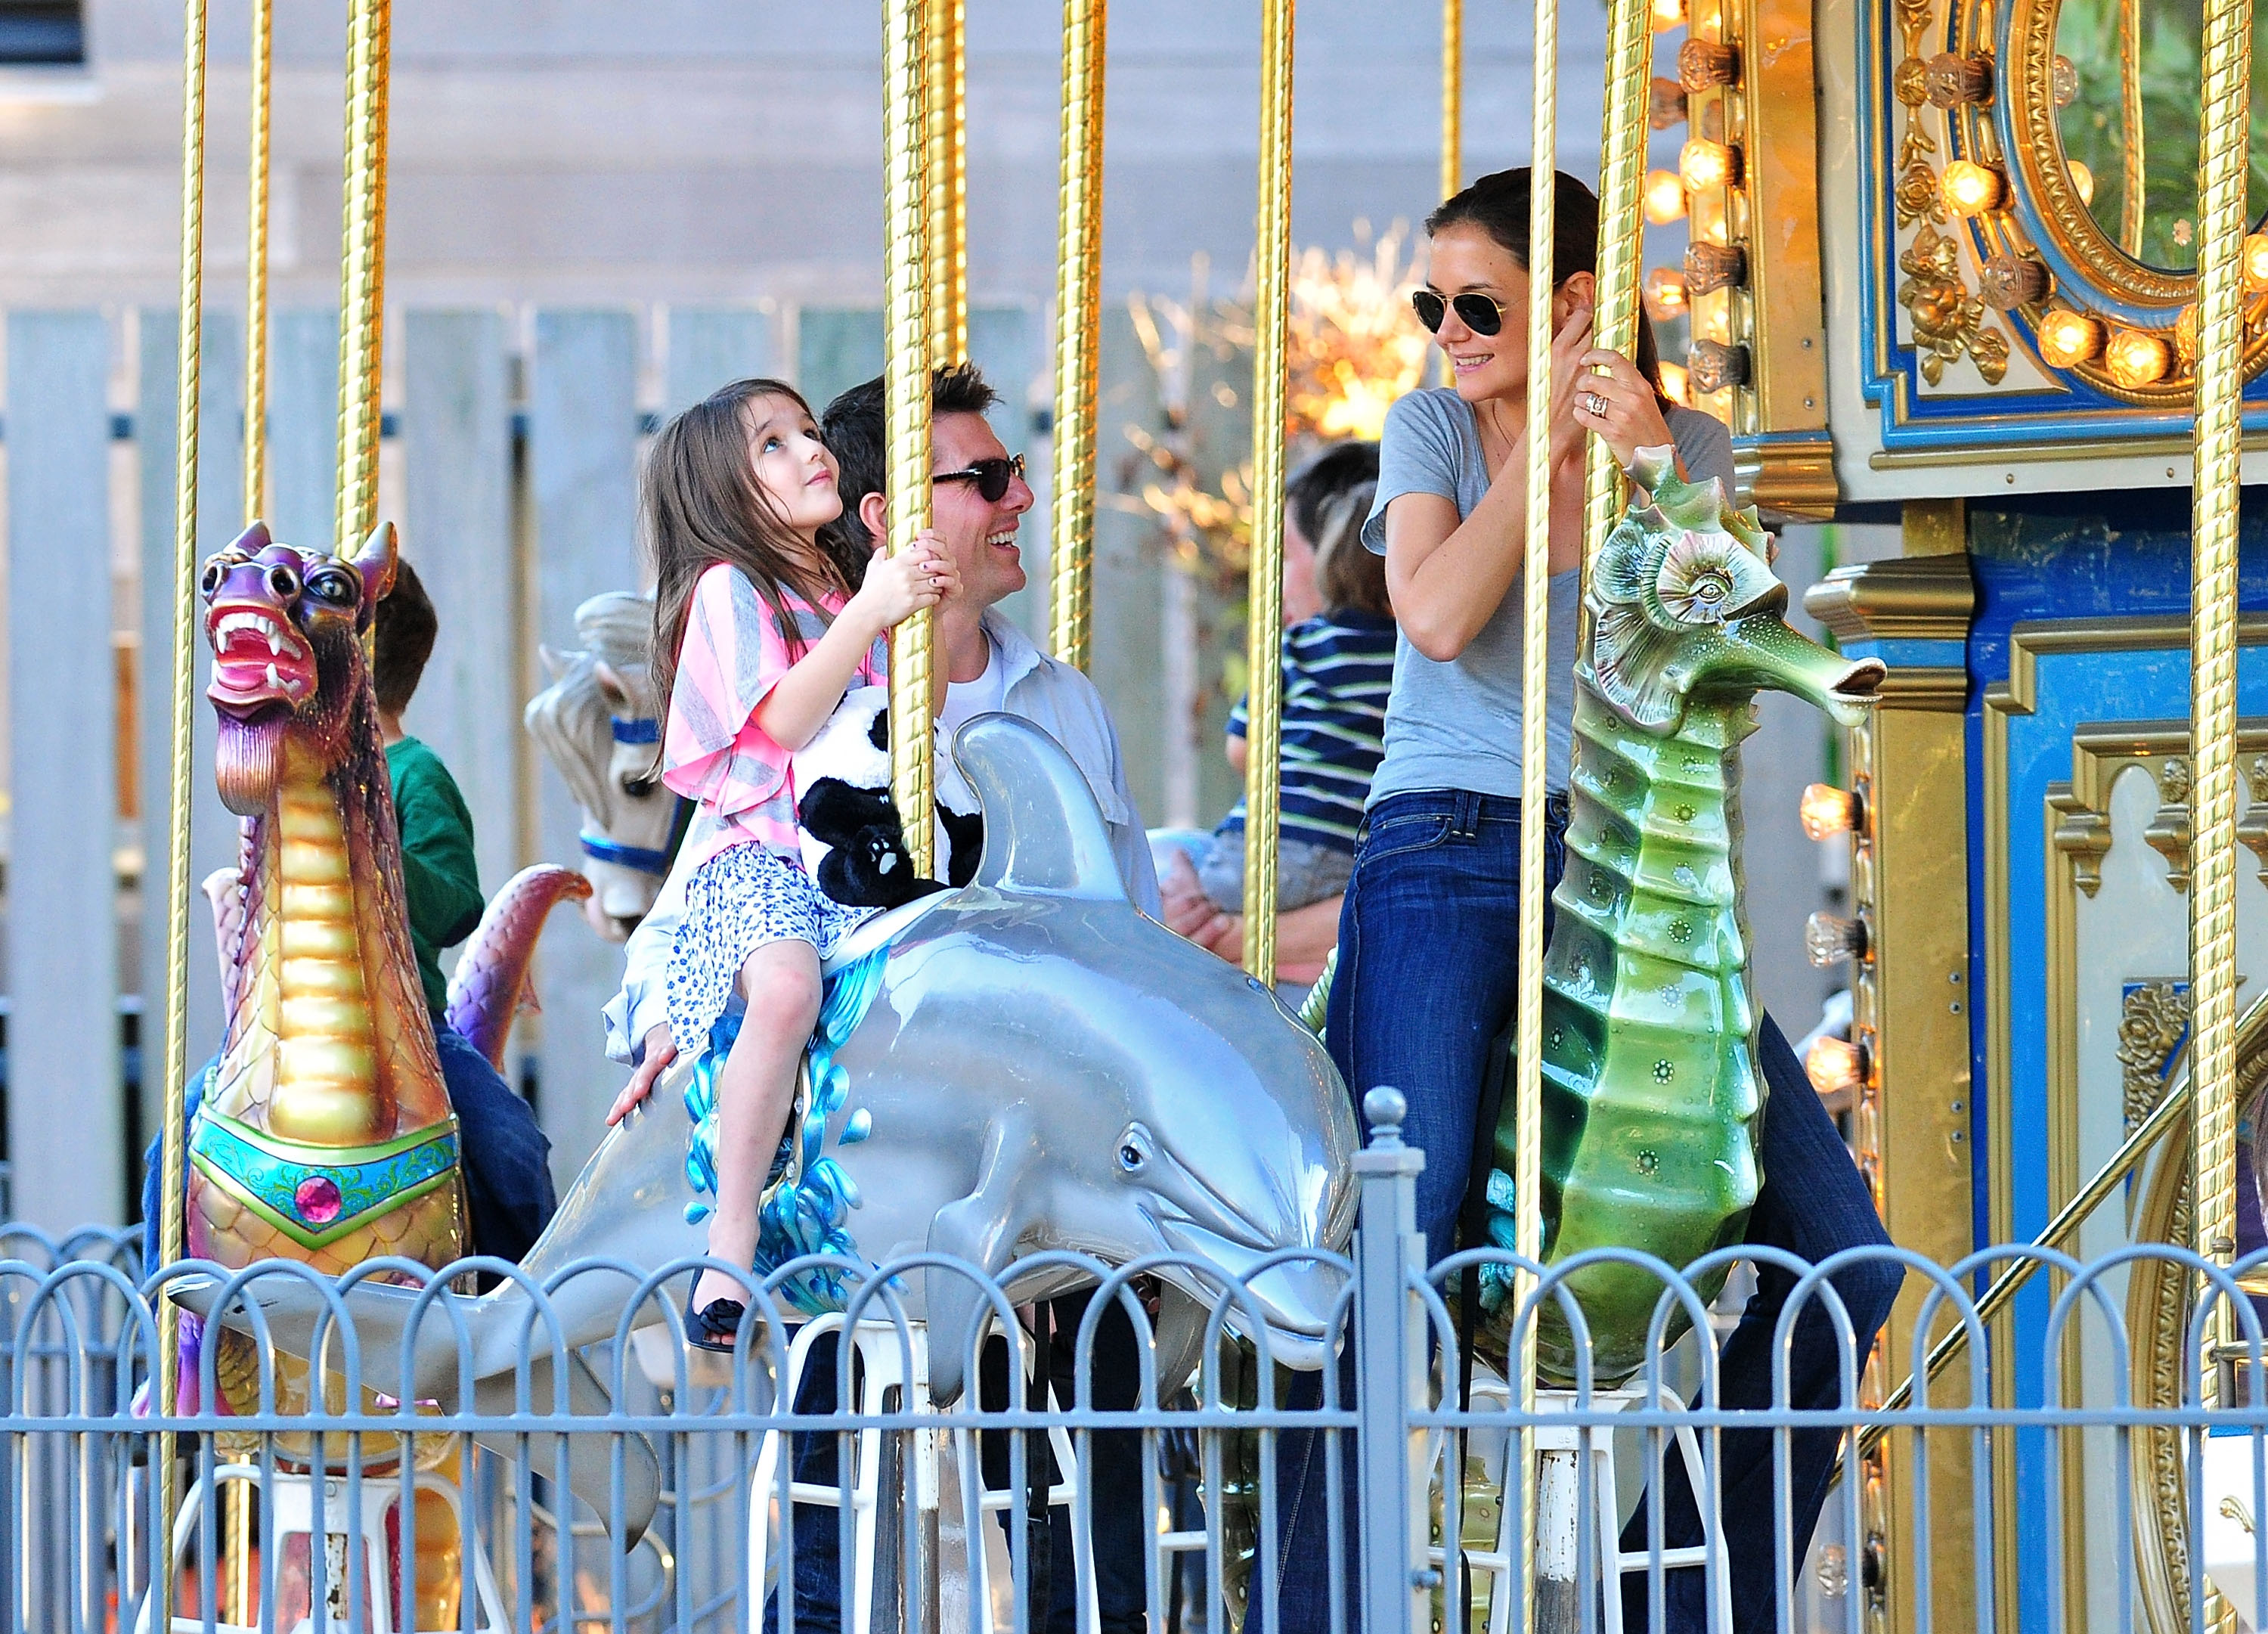 Suri Cruise, Tom Cruise, and Katie Holmes on October 8, 2011 in Pittsburgh, Pennsylvania | Source: Getty Images